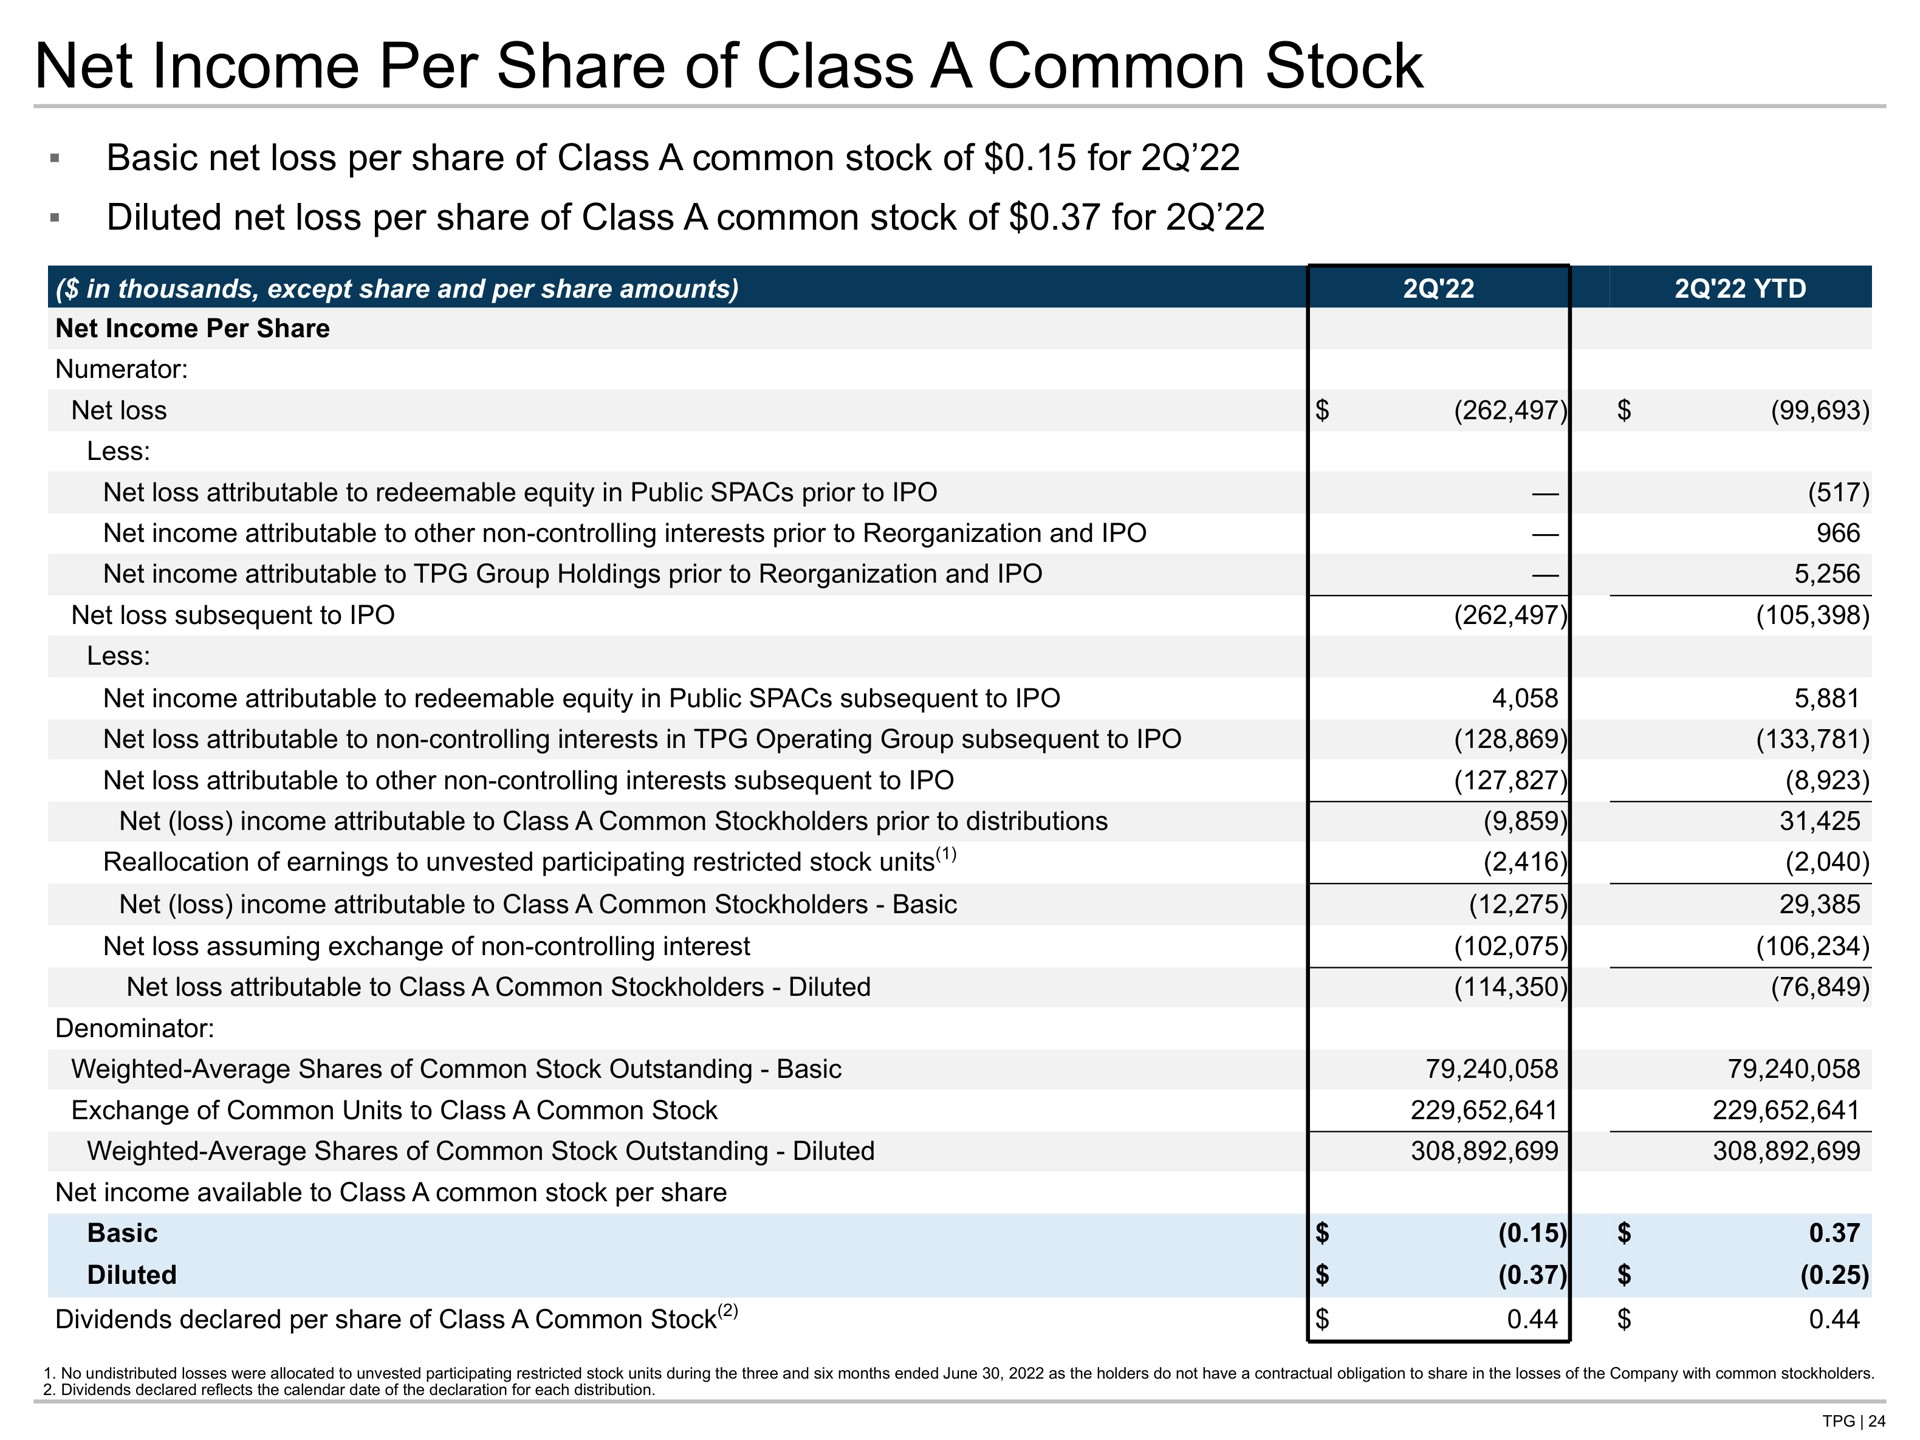 net income per share of class a common stock basic loss for diluted loss for | TPG